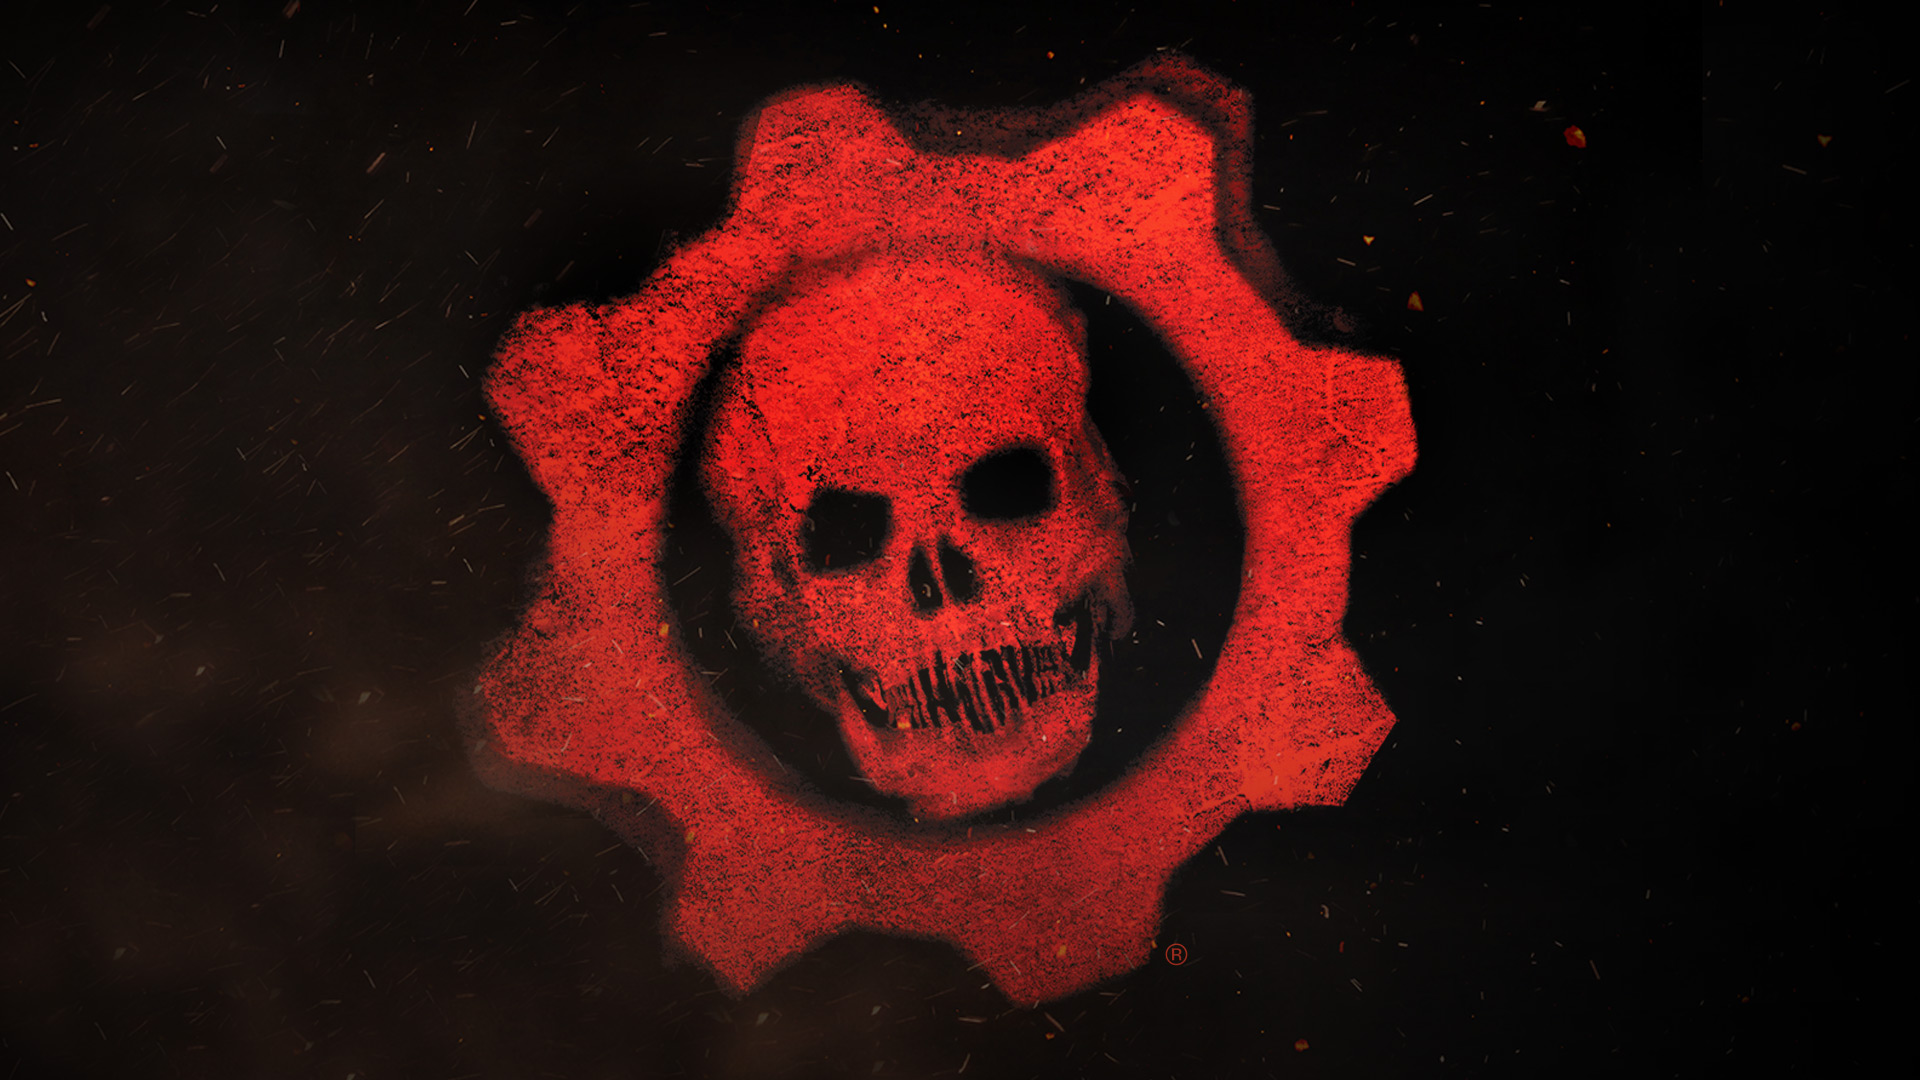 gears tactics close a hole before it opens